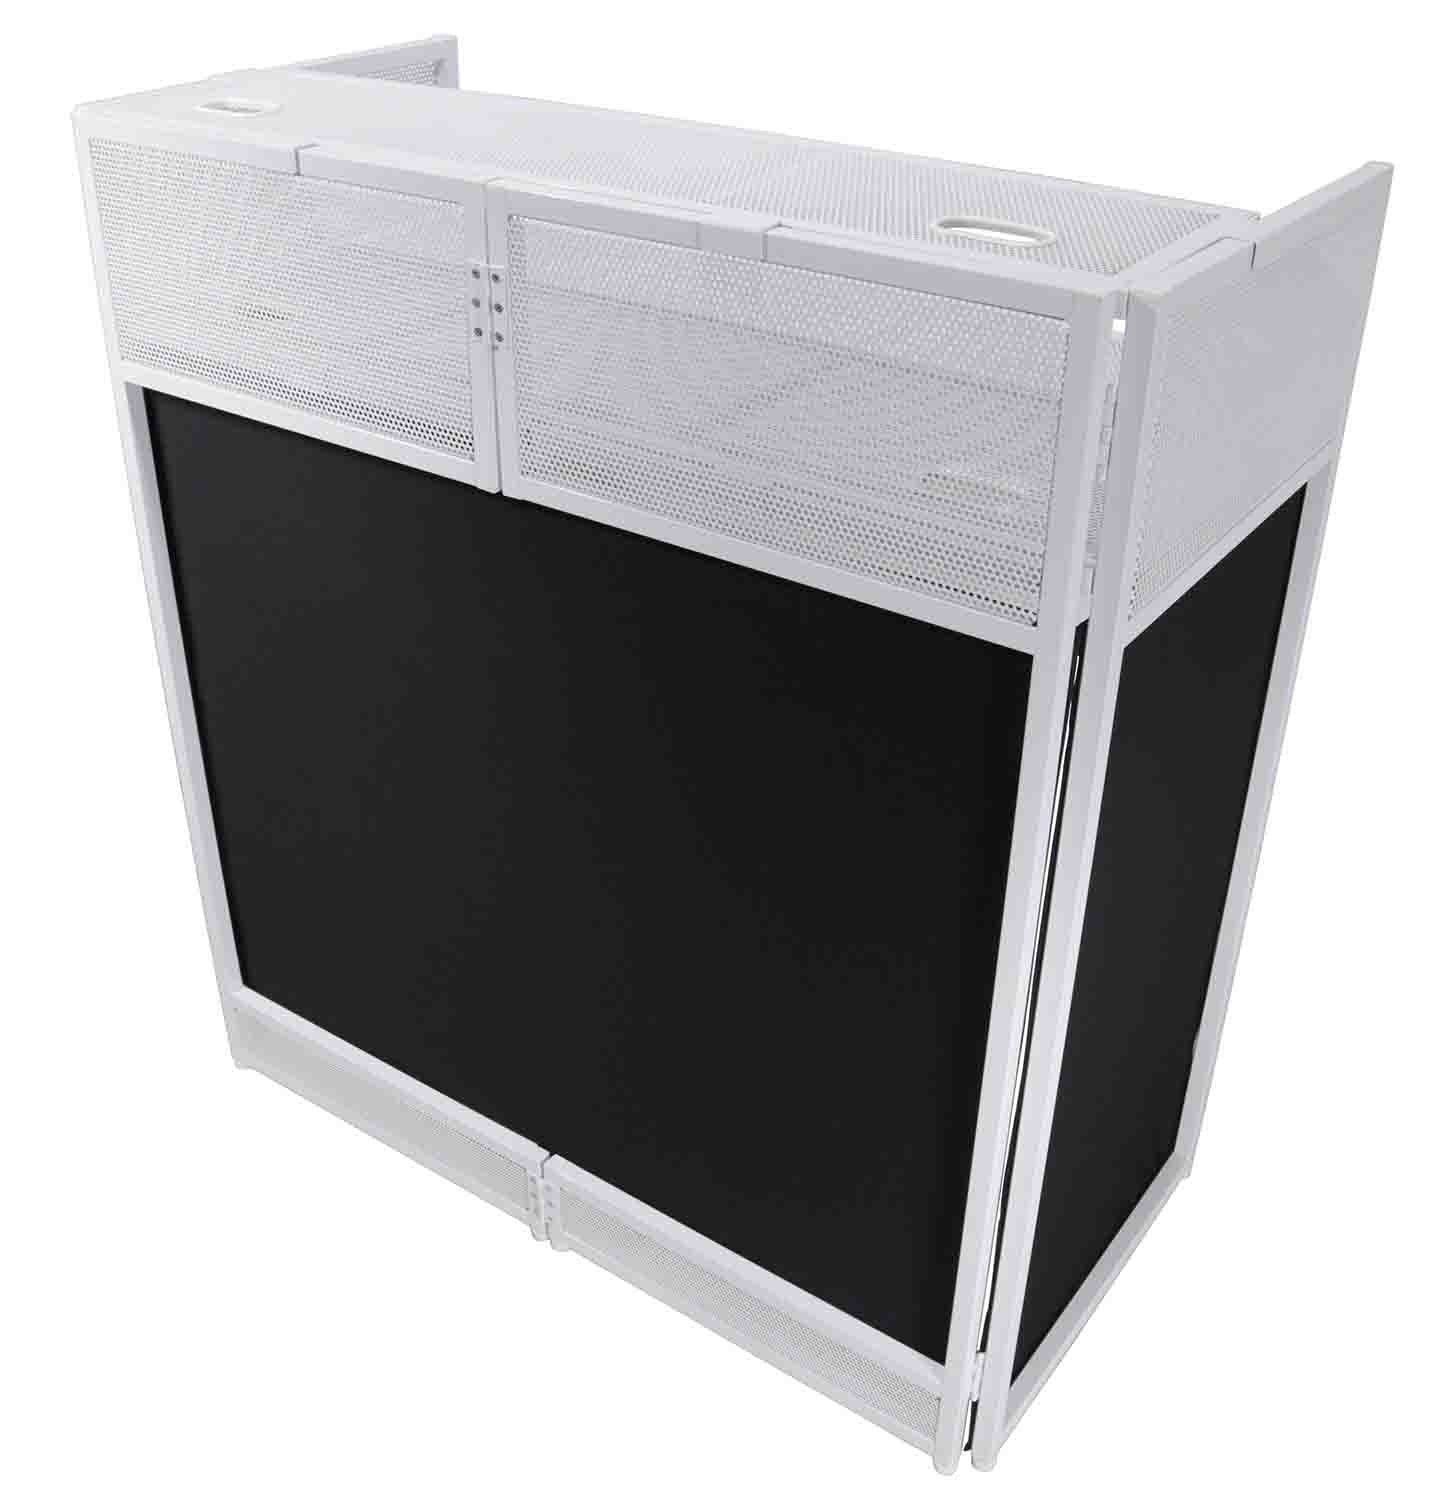 ProX XF-VISTA WH MK2 DJ Booth Facade Table Station Frame with Scrim kit and Padded Travel Bag - White/ Black - Hollywood DJ